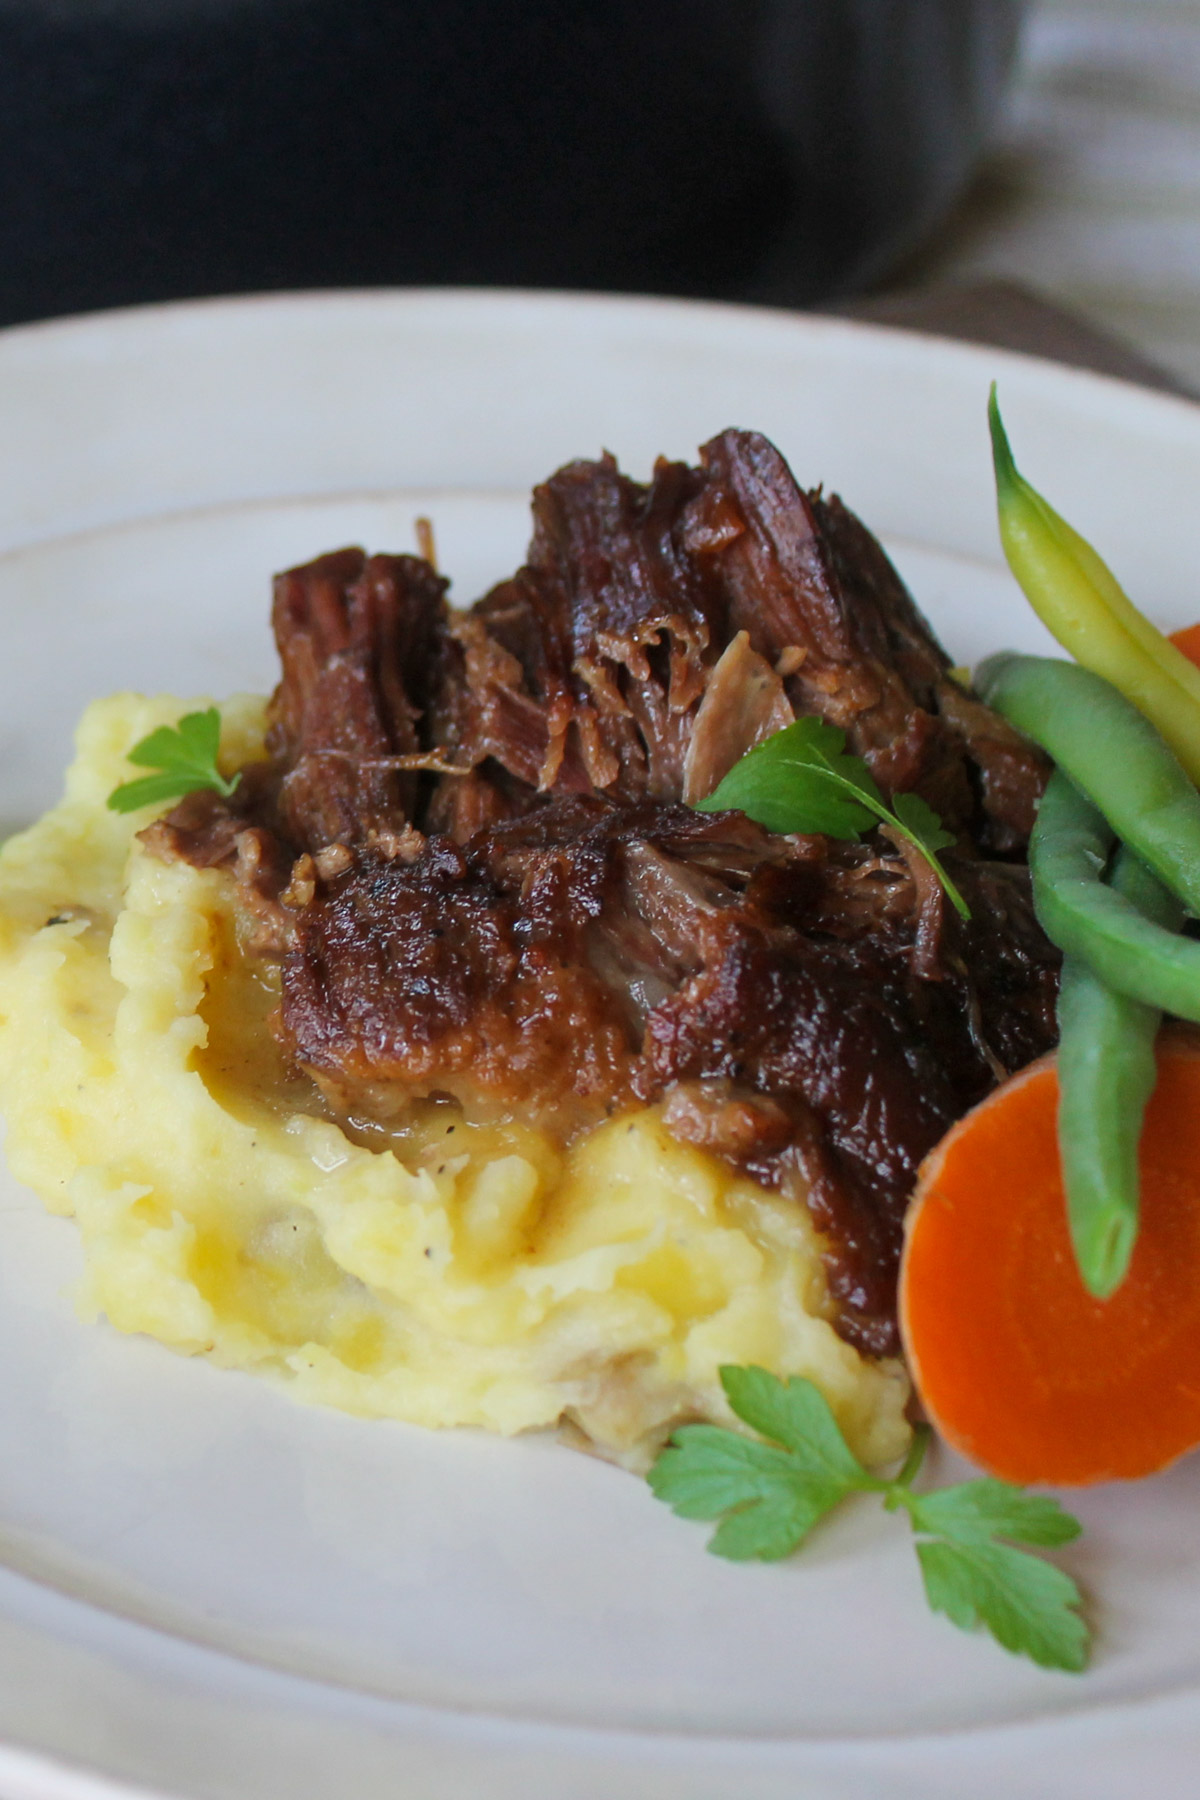 Tender braised beef roast on mashed potatoes with vegetables.